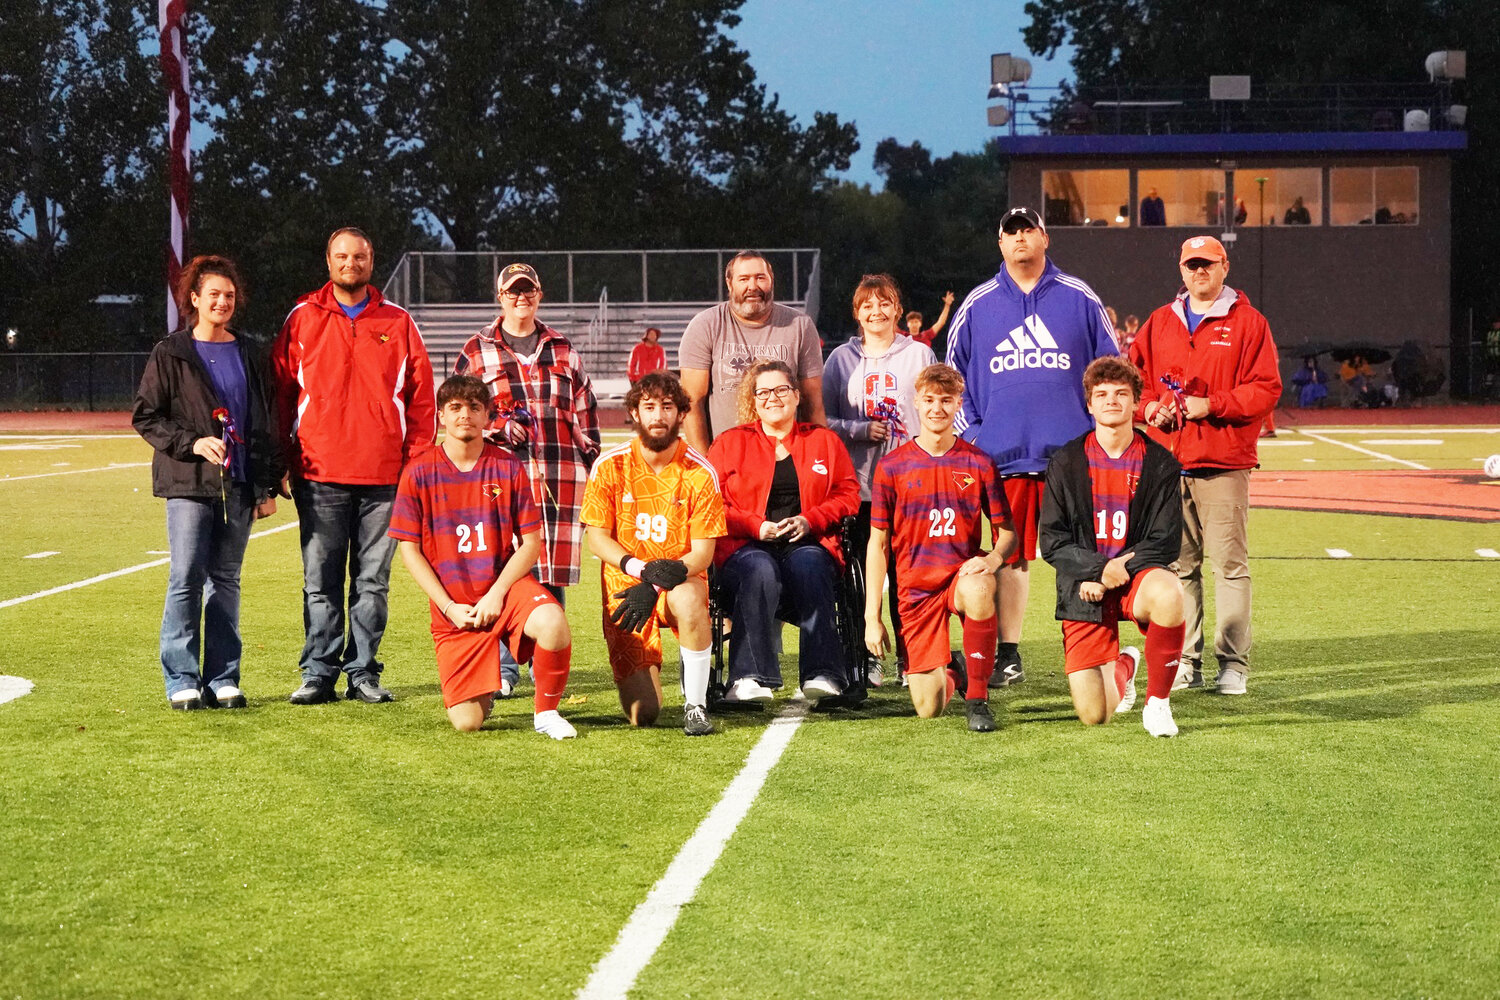 CARDINALS SOCCER recognized four 2024 proposed graduates at their Senior Night back in October in Matteo Calabrese, Garrett Ethridge, Gage Ross and Gavin Tennal.  The seniors helped to lay the groundwork for a program that shows much promise and hope in it's younger players who will return next season.